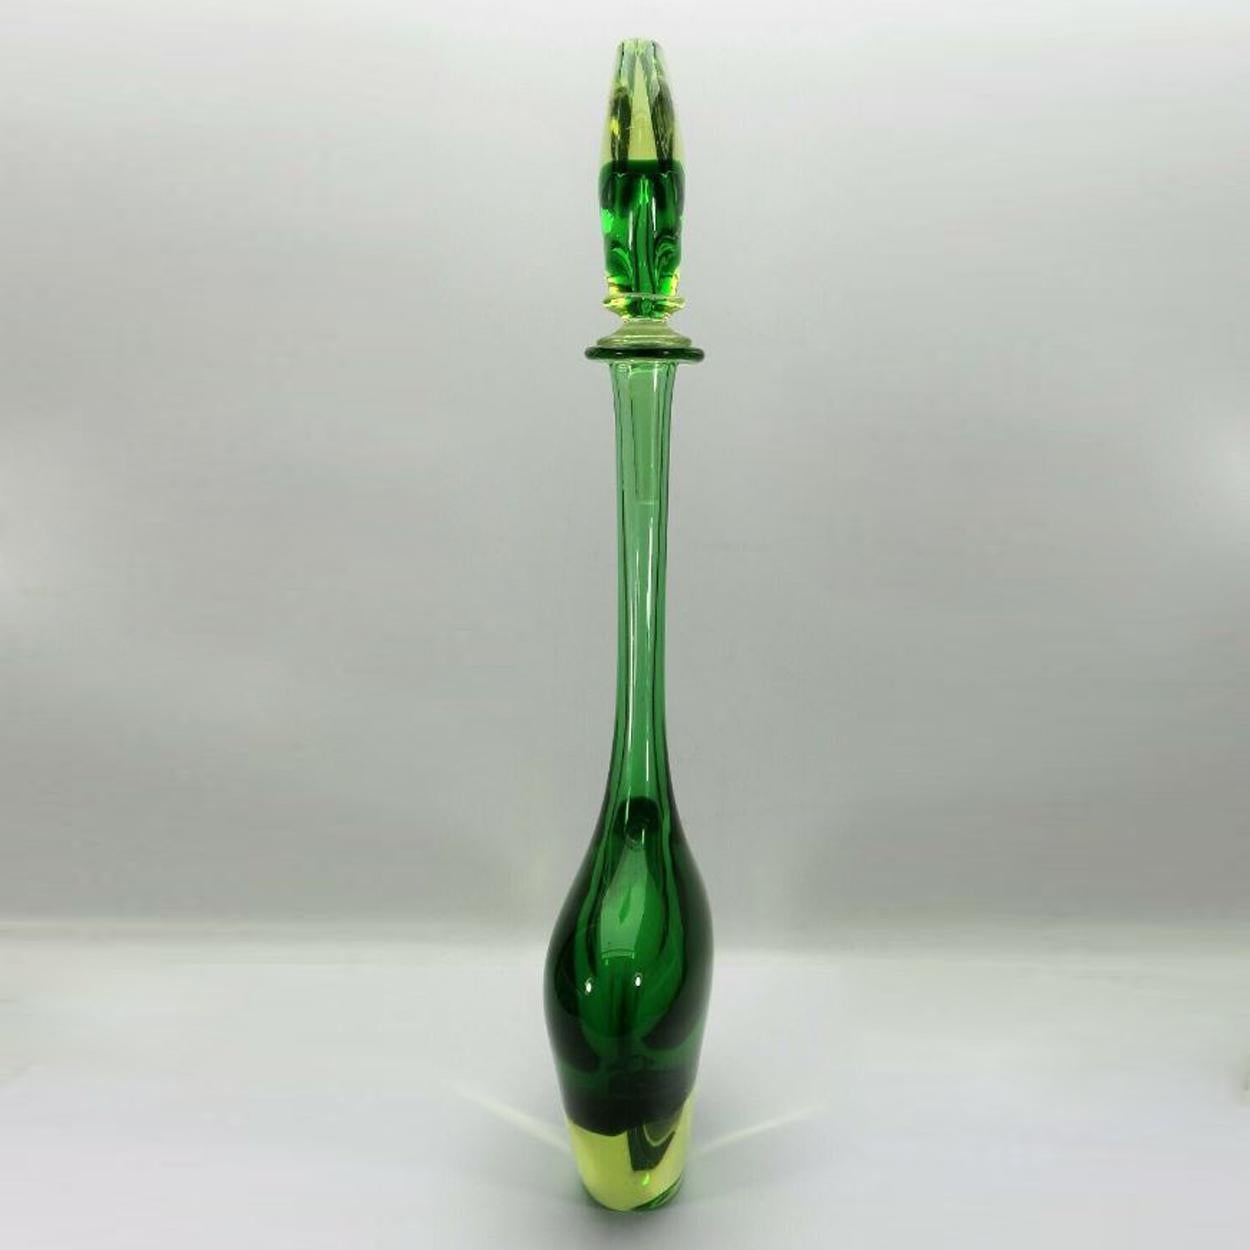 Large carafe with stopper in the popular Sommerso technique, the design was either by Flavio Poli or by Mario Pinzoni for Seguso Vetri d'Arte in the 1950s-1960s. Green, uranium-containing glass with a yellow overlay in a very elegant teardrop shape.